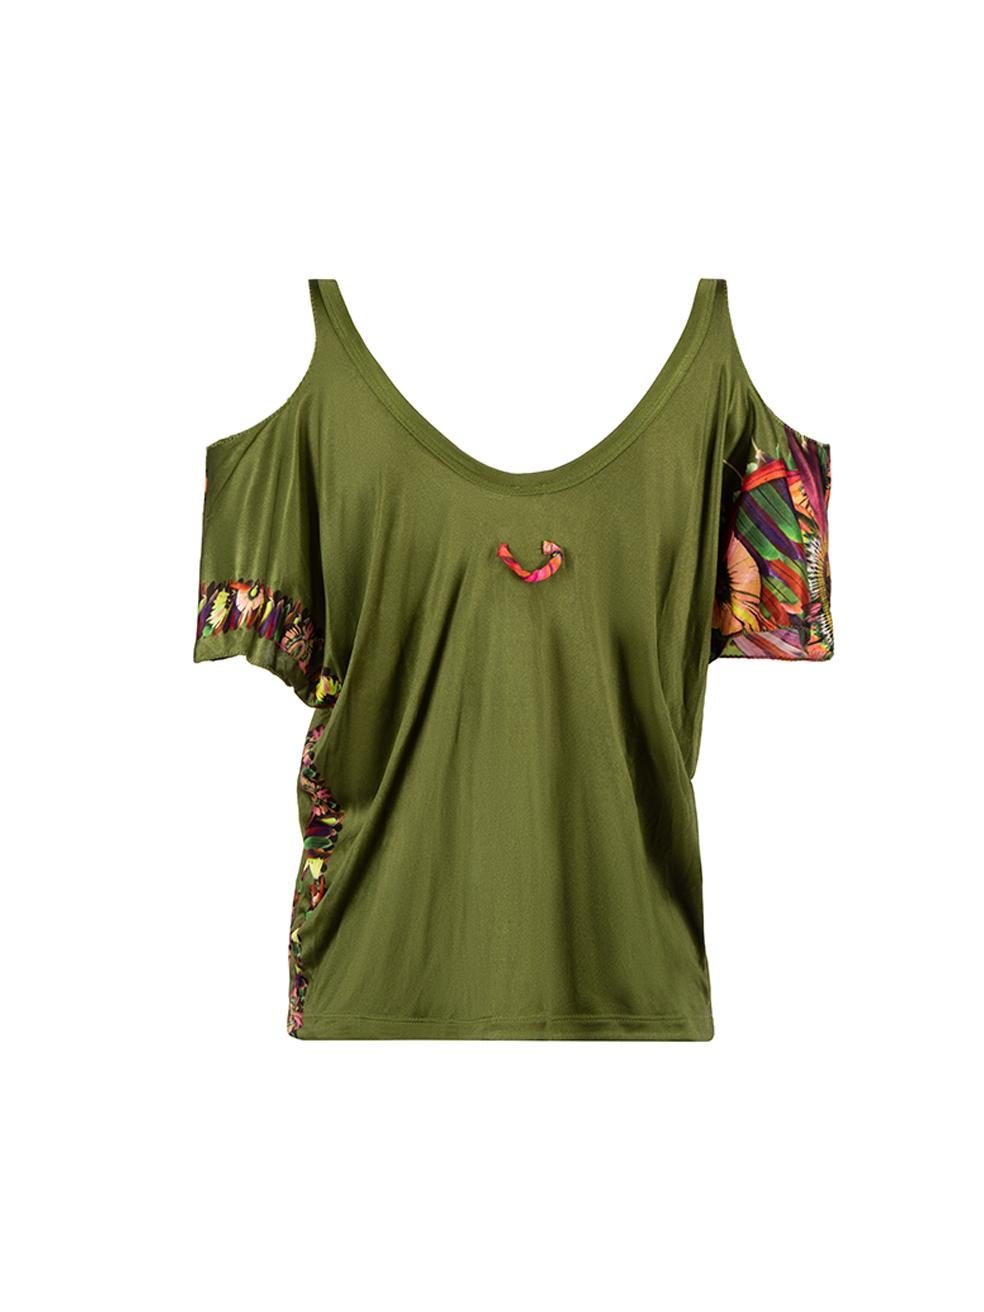 Jean Paul Gaultier Soleil Green Floral Printed Cold Shoulder Top Size XS In Good Condition For Sale In London, GB